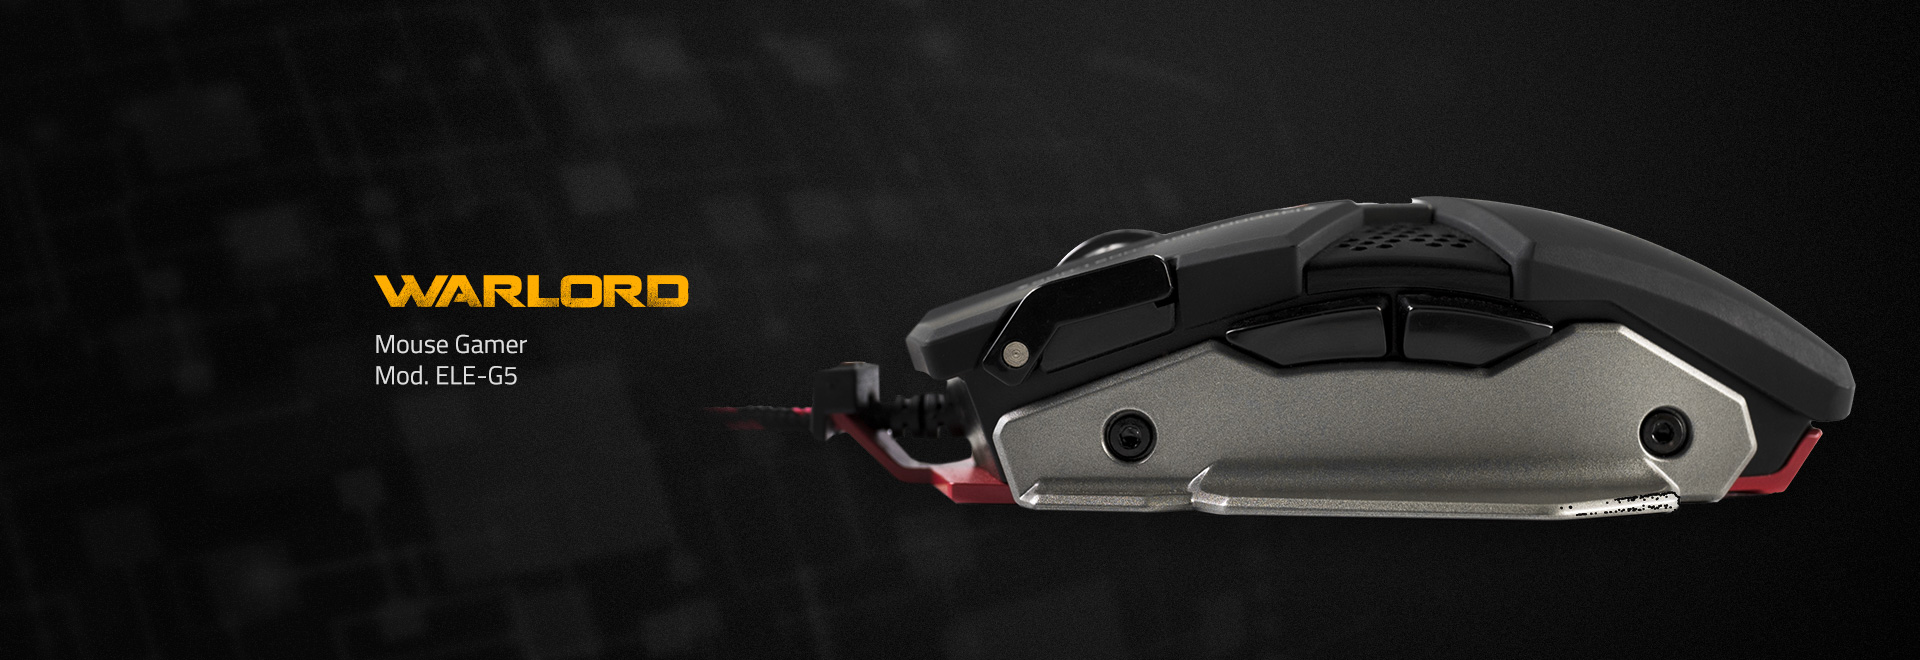 Warlord 4000dpi Gaming Mouse - Flyer: 0